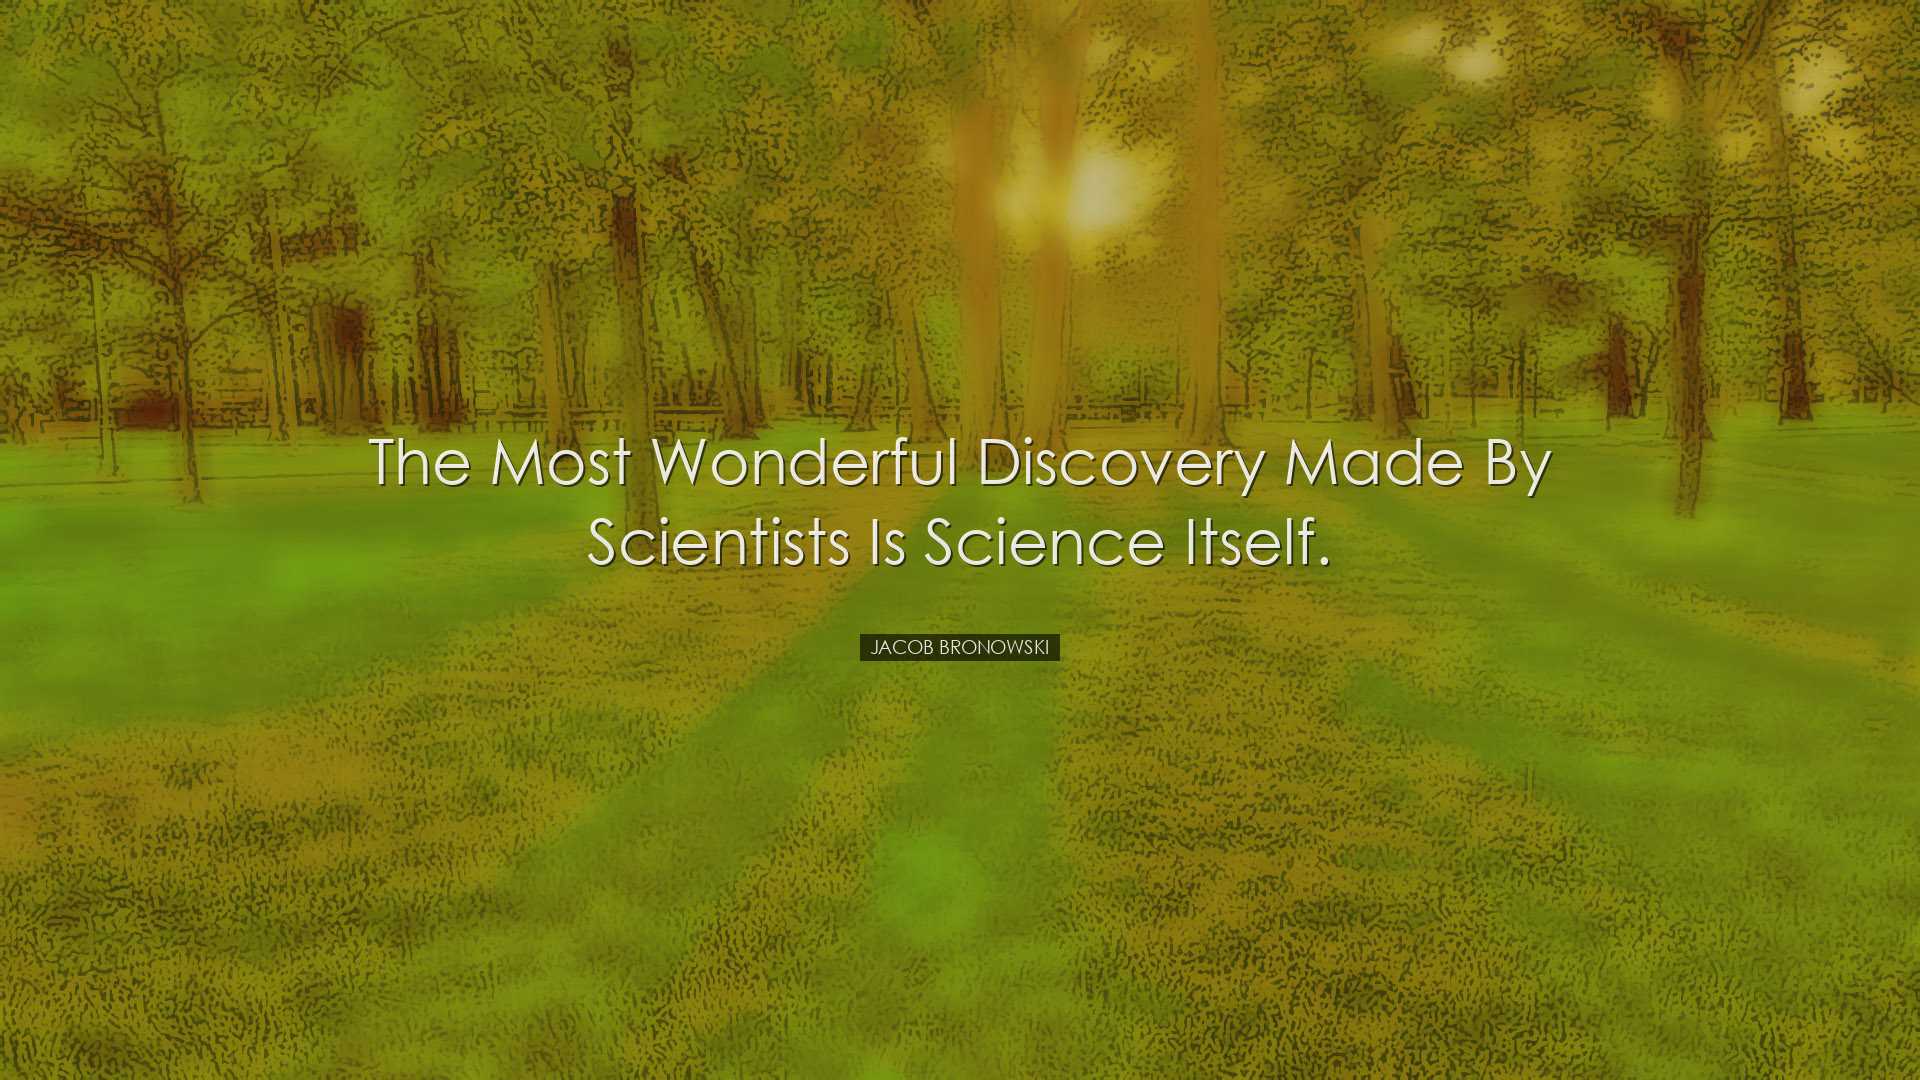 The most wonderful discovery made by scientists is science itself.